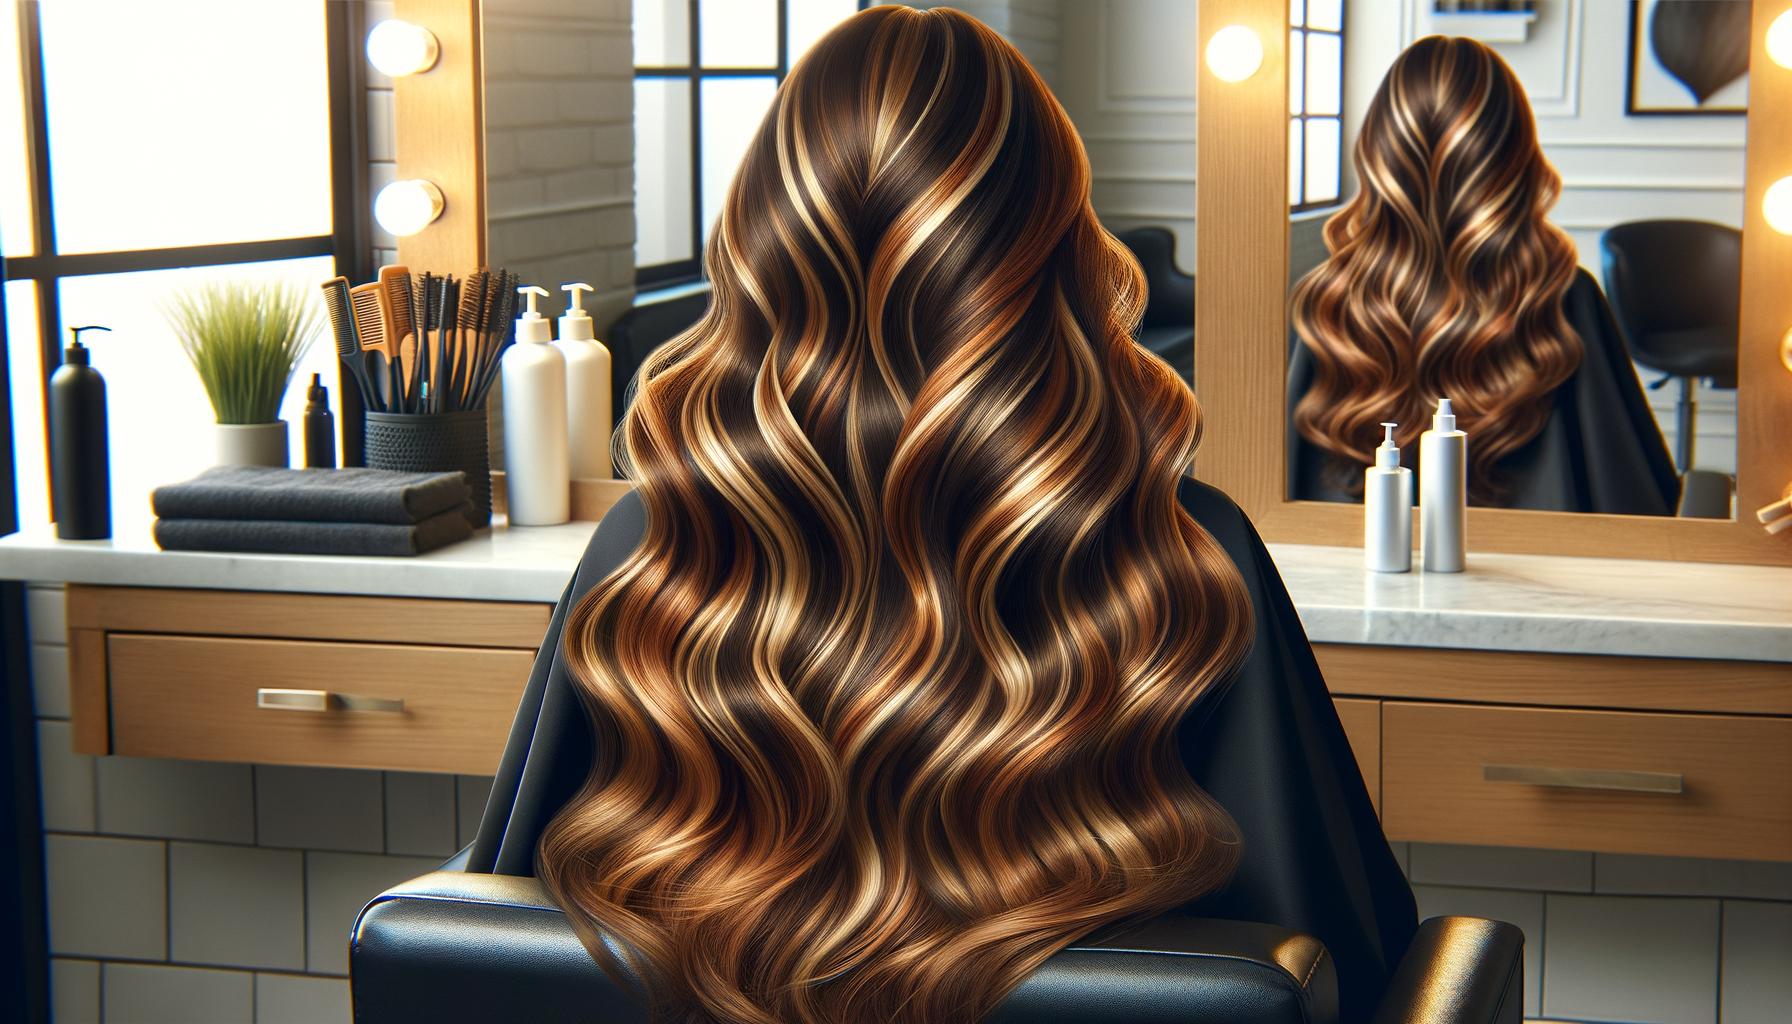 Trendy looks achieved with caramel highlights on brown hair